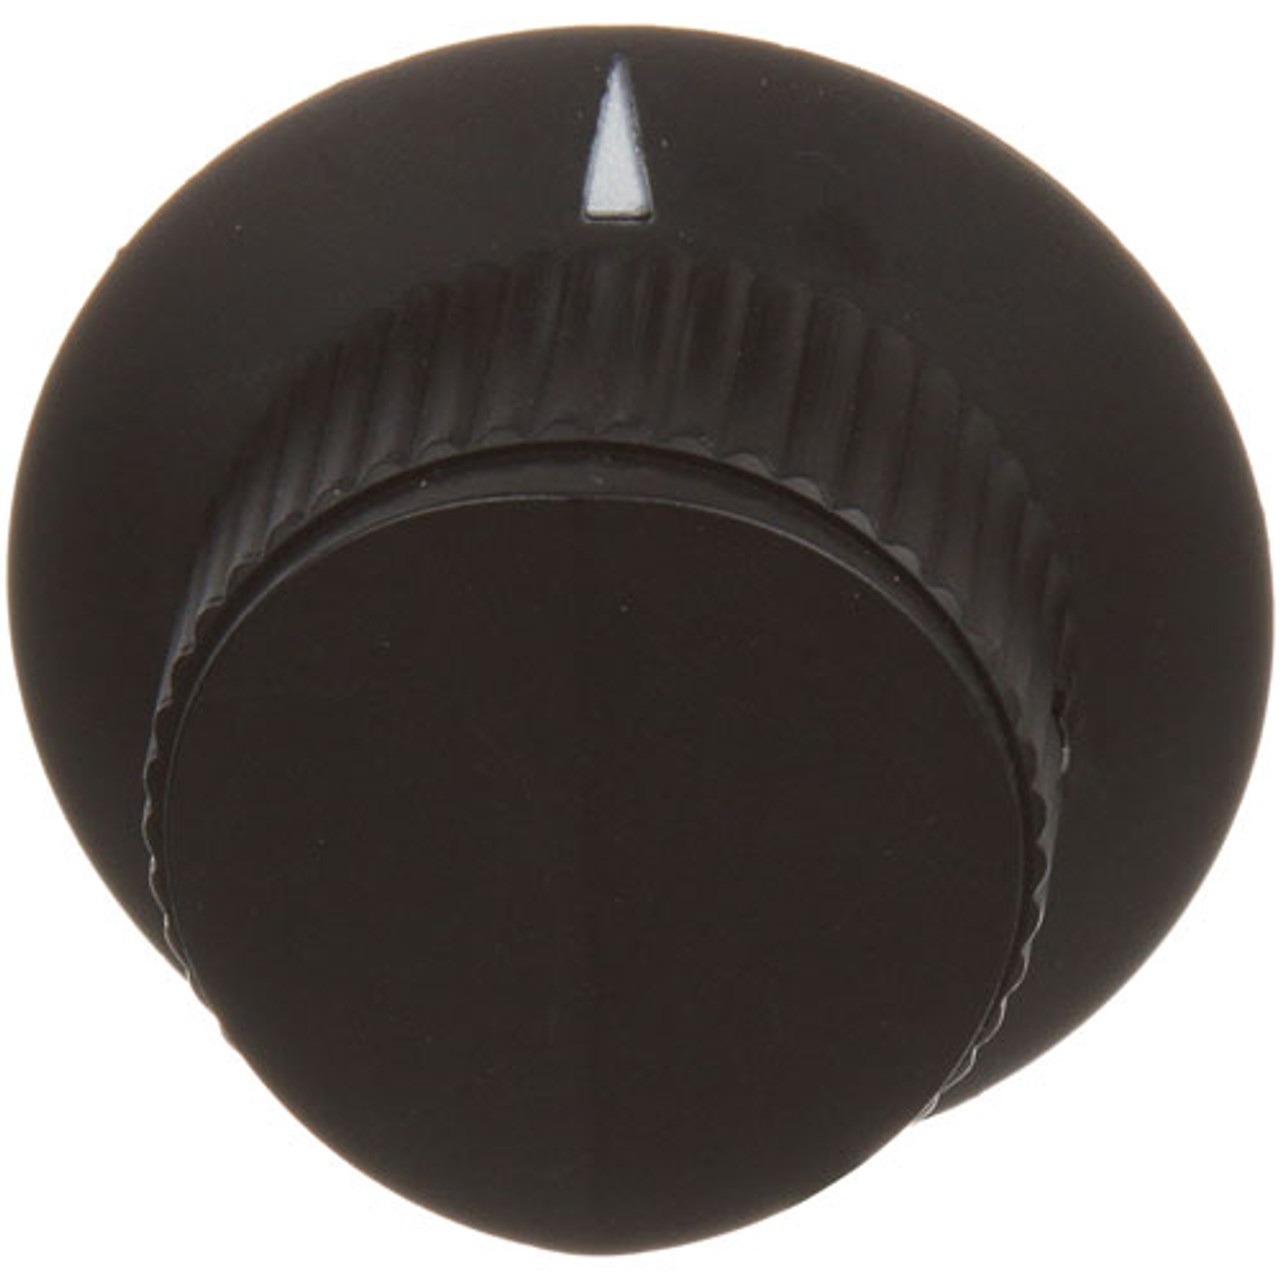 Indicator Knob - Replacement Part For Blodgett 36616